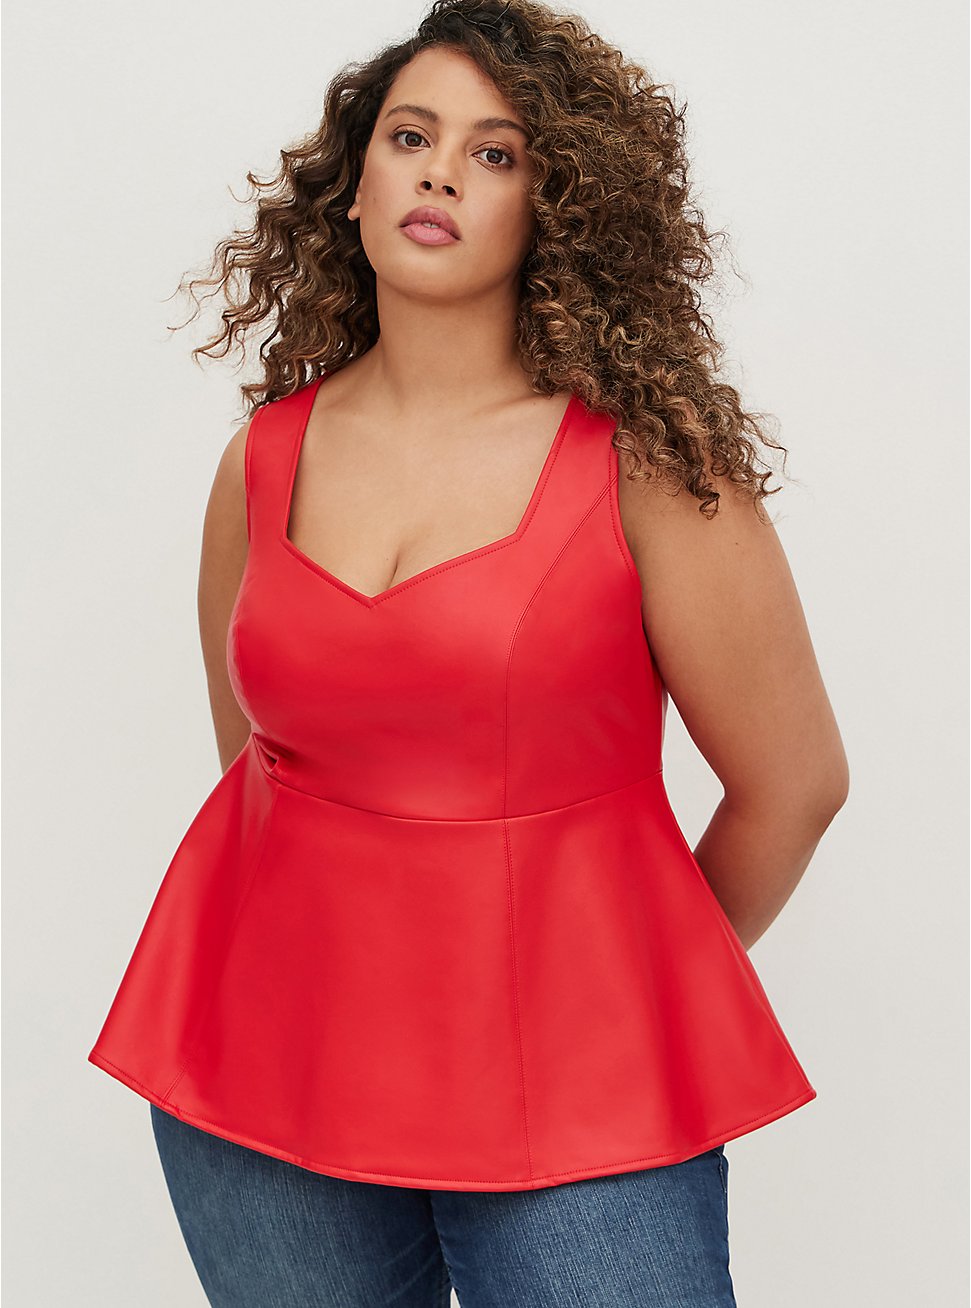 Peplum Tank - Faux Leather Red, , hi-res